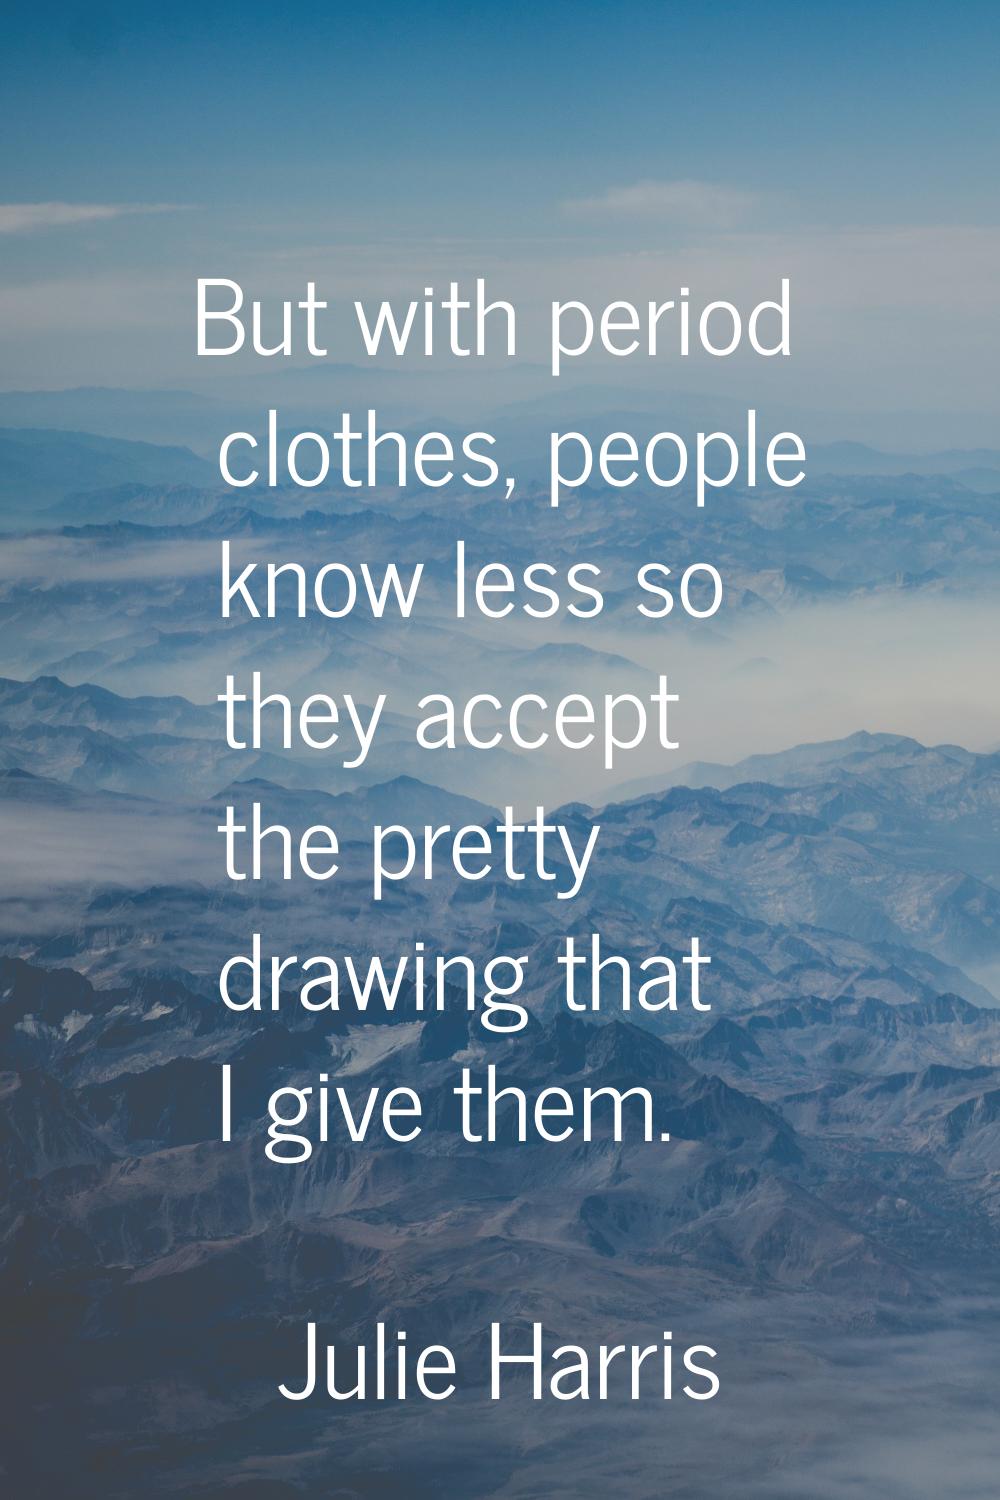 But with period clothes, people know less so they accept the pretty drawing that I give them.